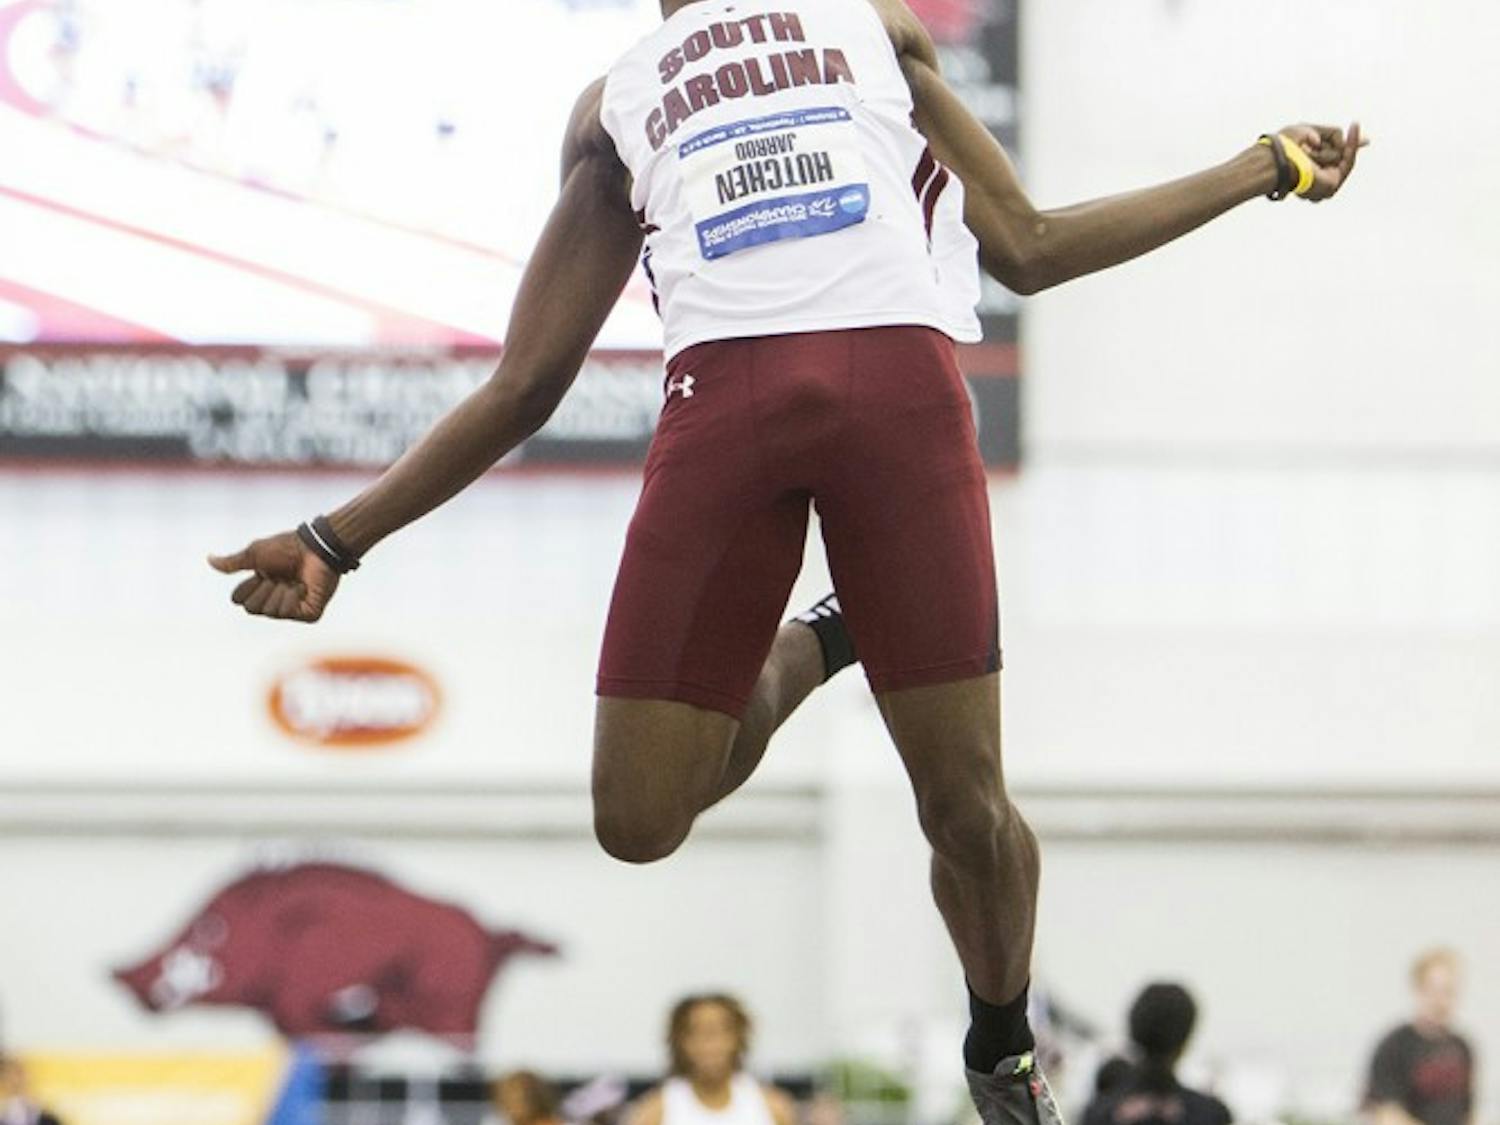 NCAA Indoor Track Championships 2013 at the Randall Tyson Track Center in Fayetteville, Ark.Photos by razorbackphotos.com